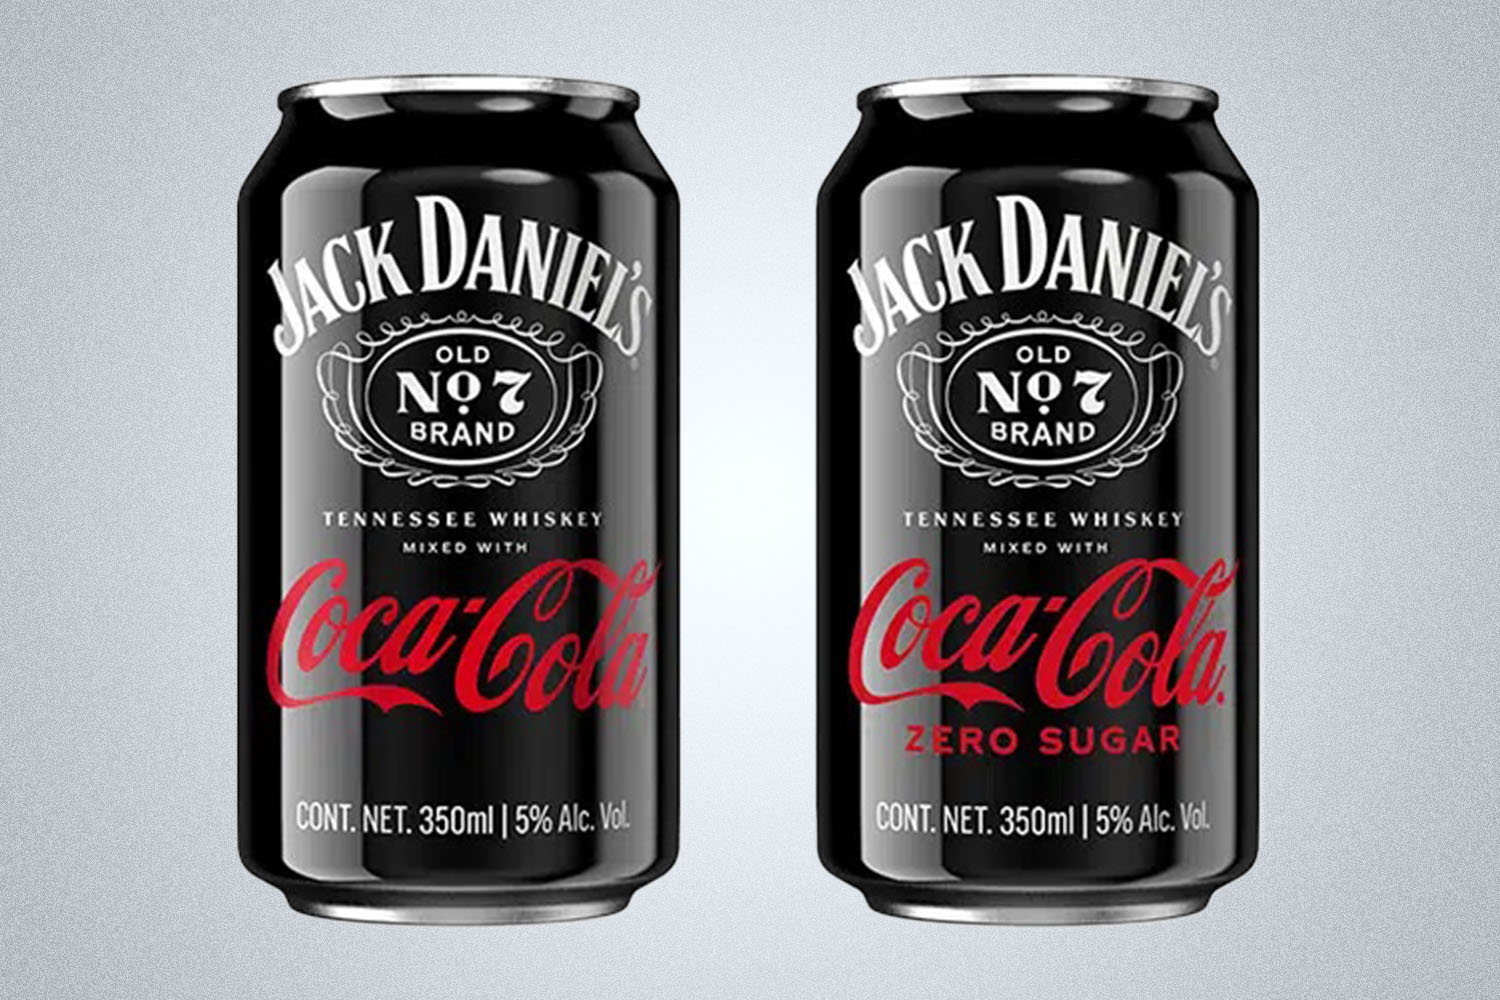 Two cans of Coke x Jack Daniel's canned cocktail on a gray background